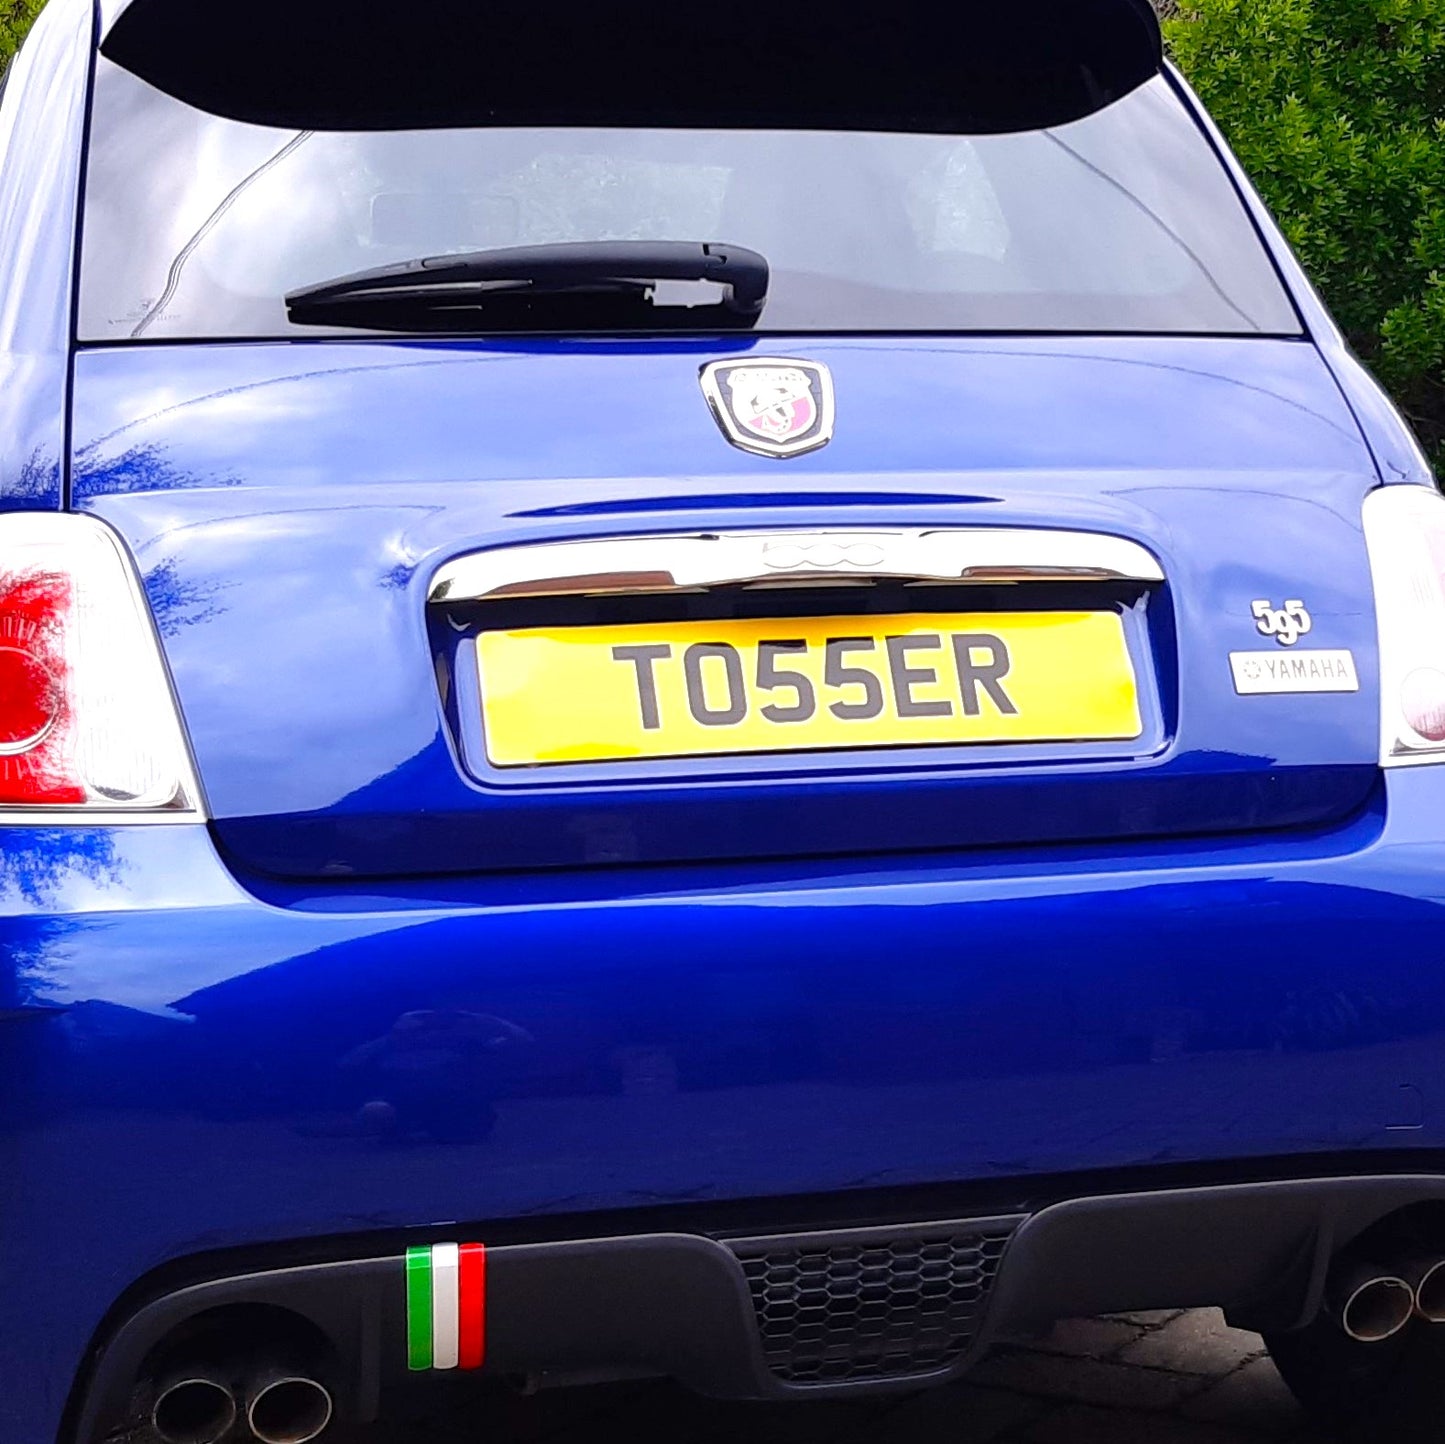 2 Joke Number Plate Stickers With "TO55ER"